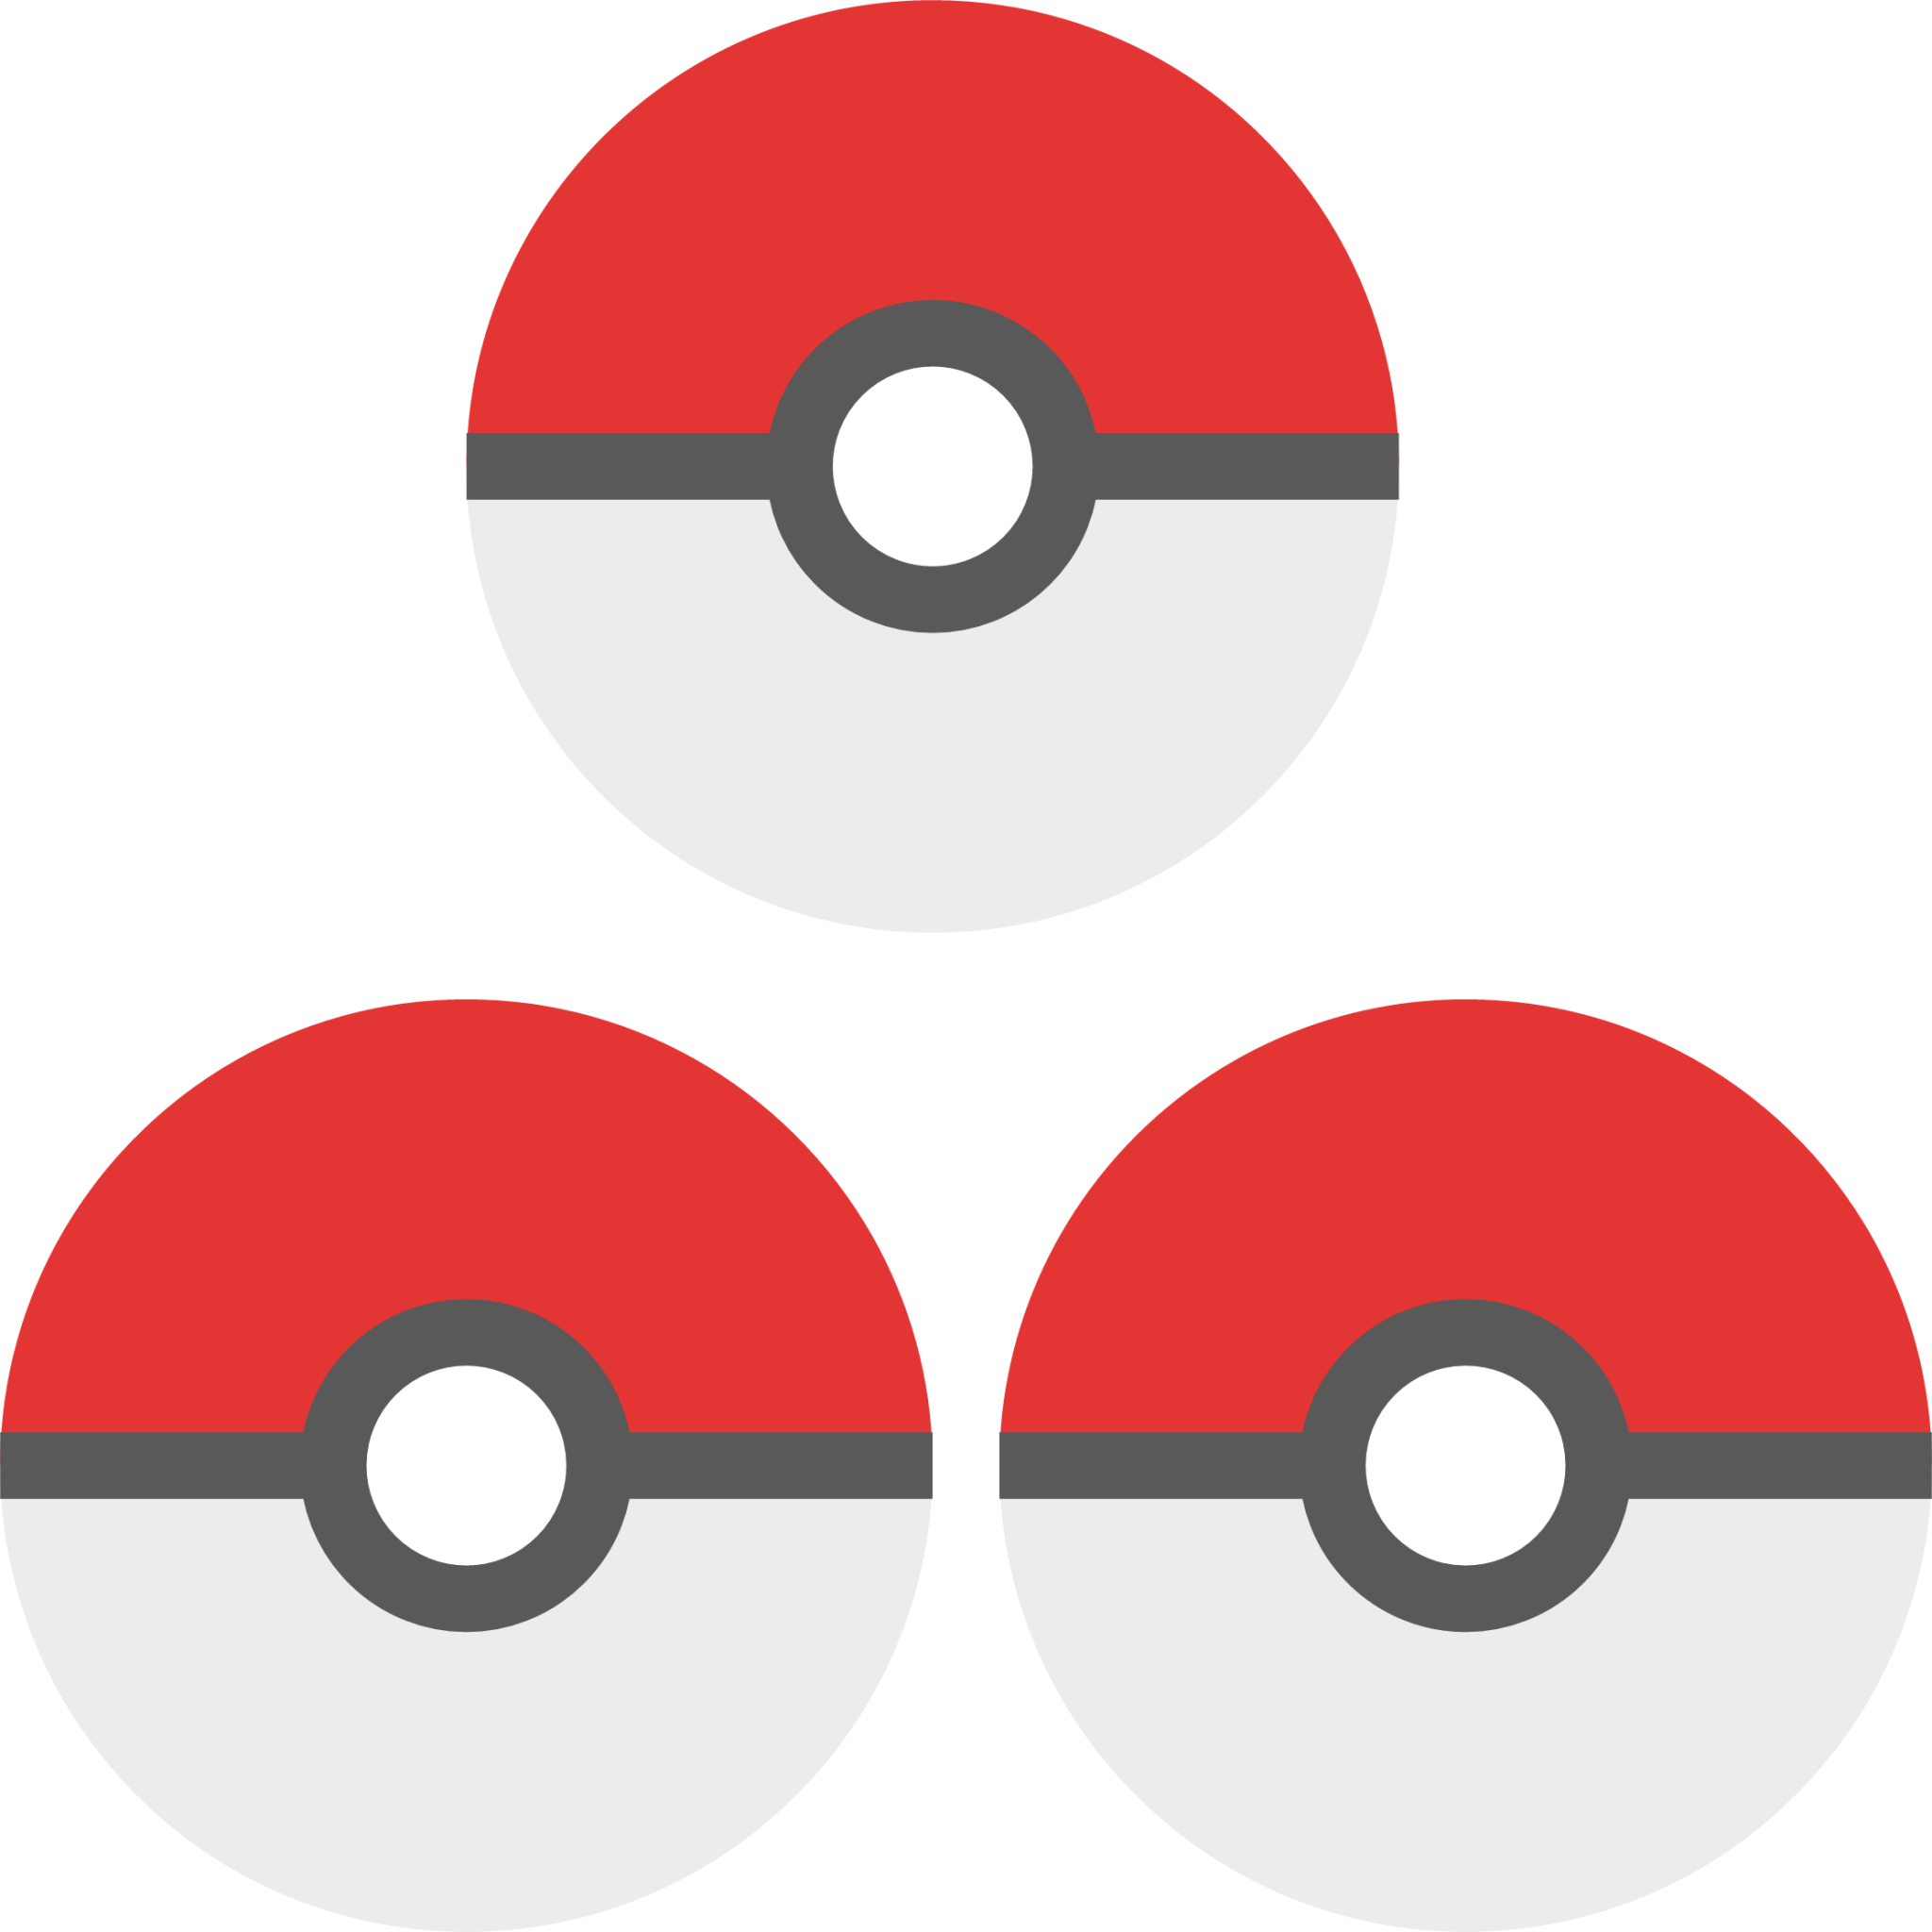 pokeball Icon - Download for free – Iconduck